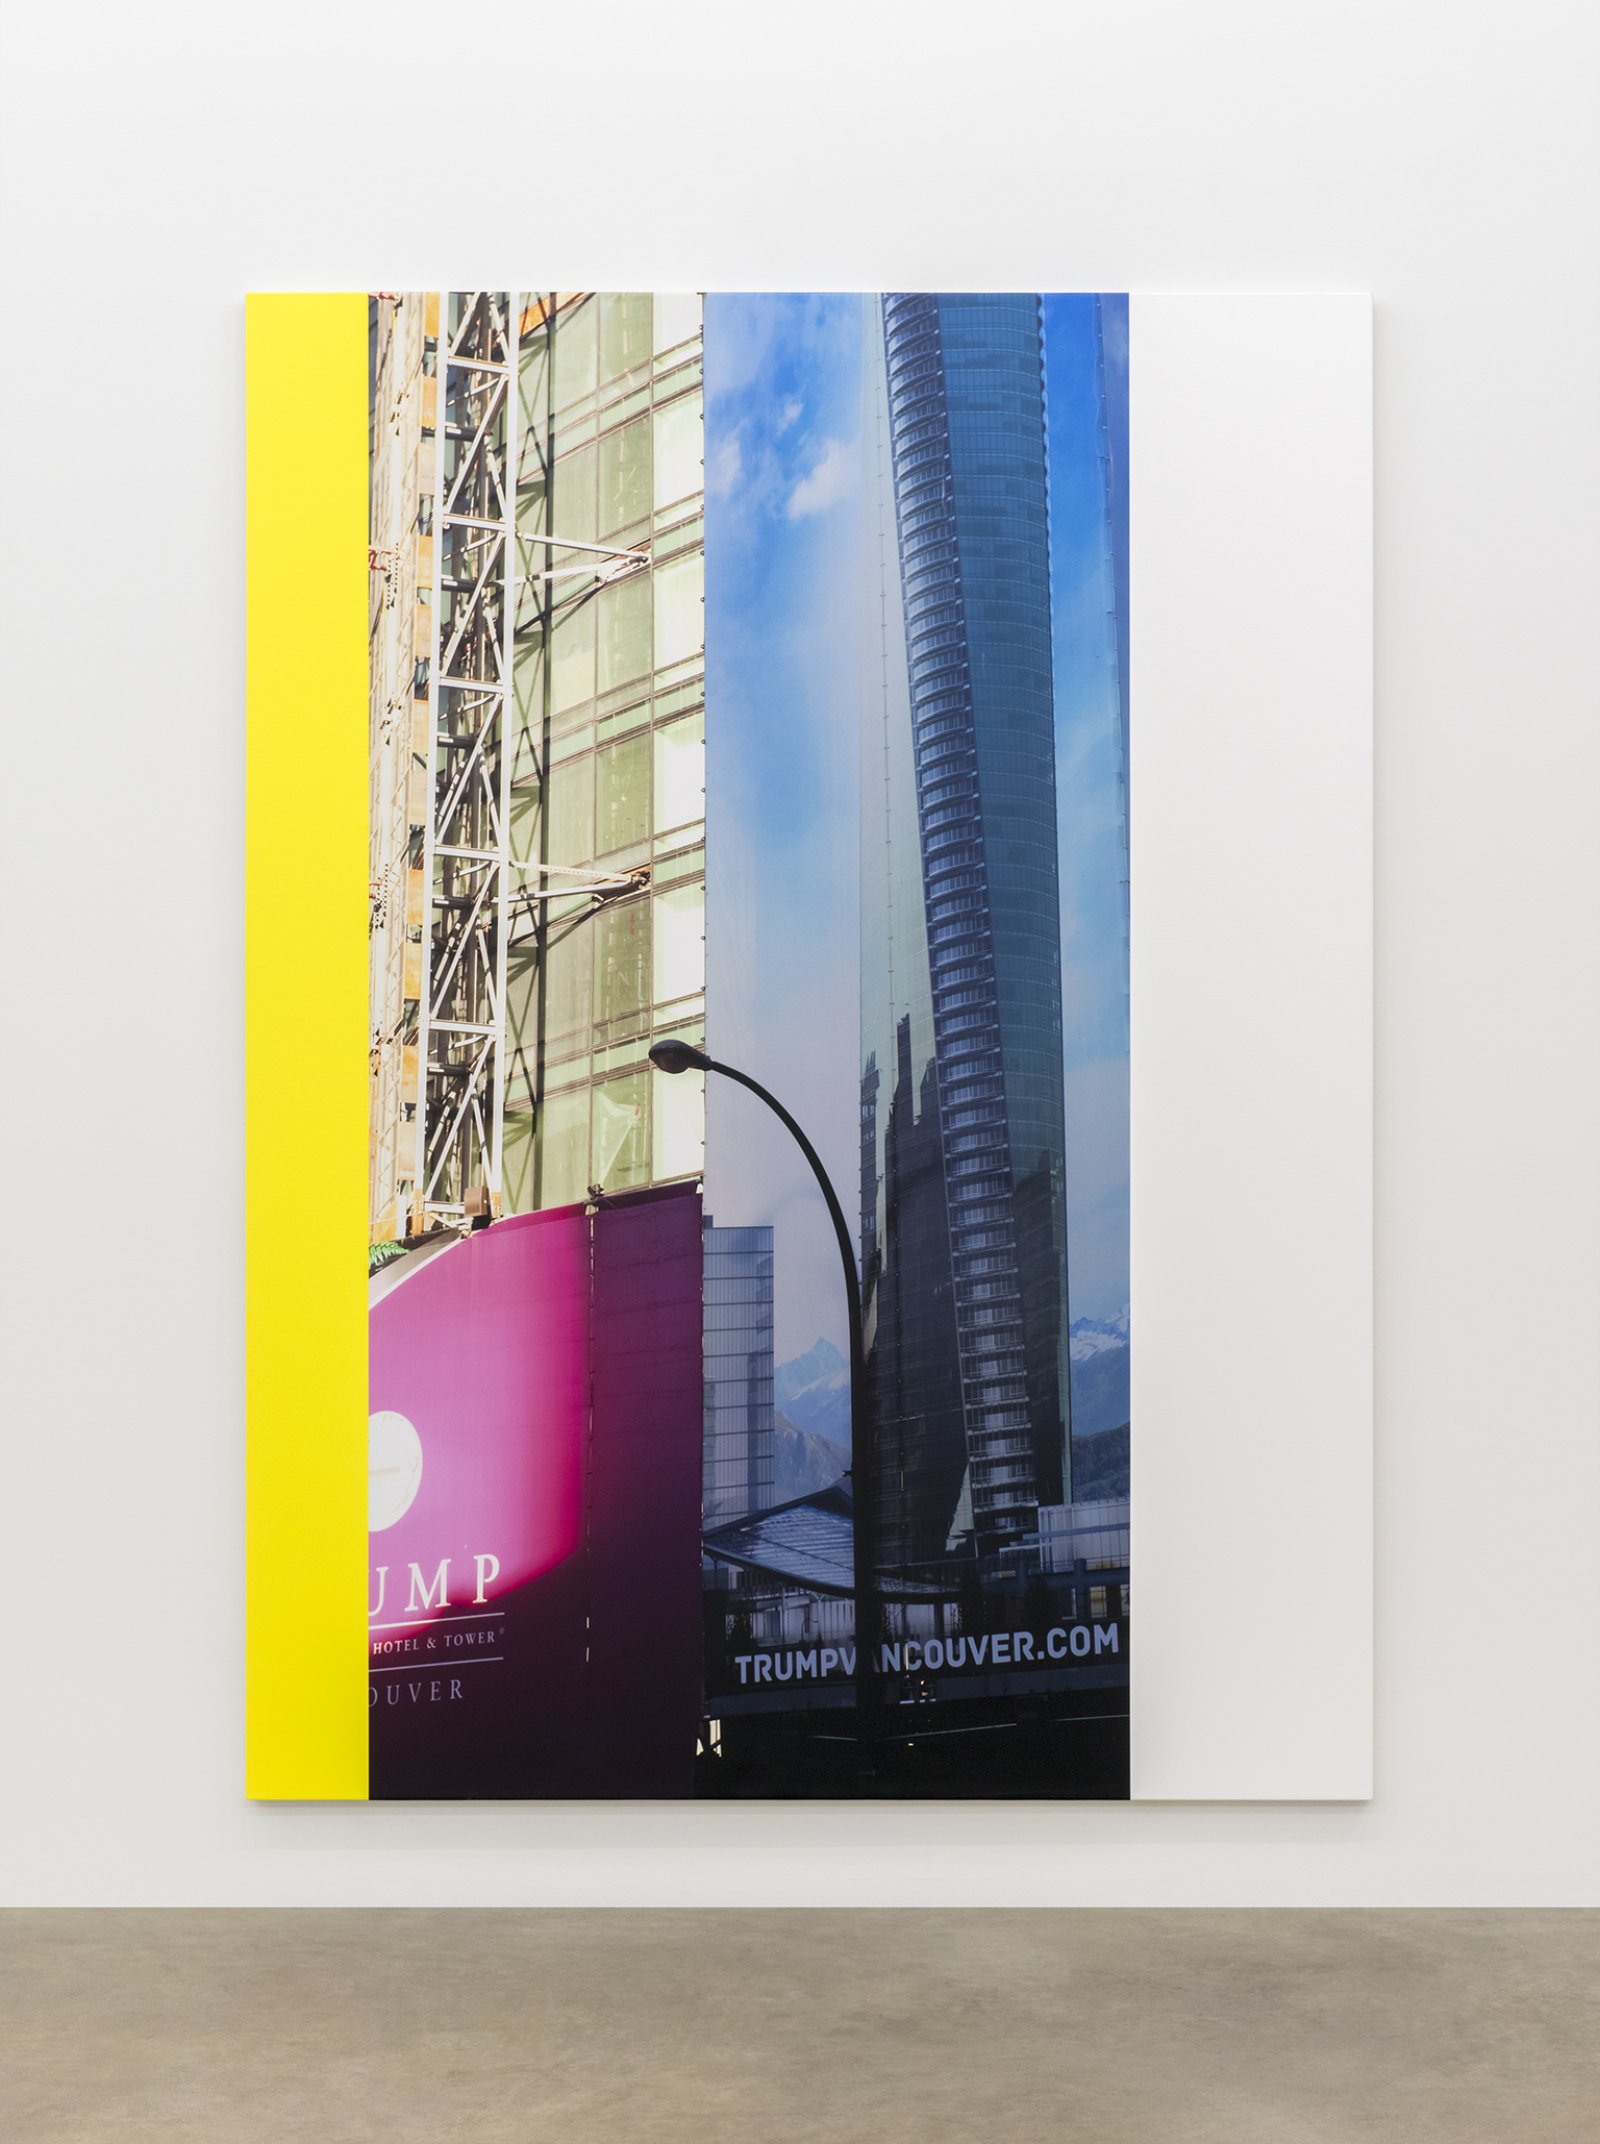 Ian Wallace, Construction Site (The Tower) II, 2015, photolaminate and acrylic on canvas, 96 x 72 in. (244 x 183 cm)